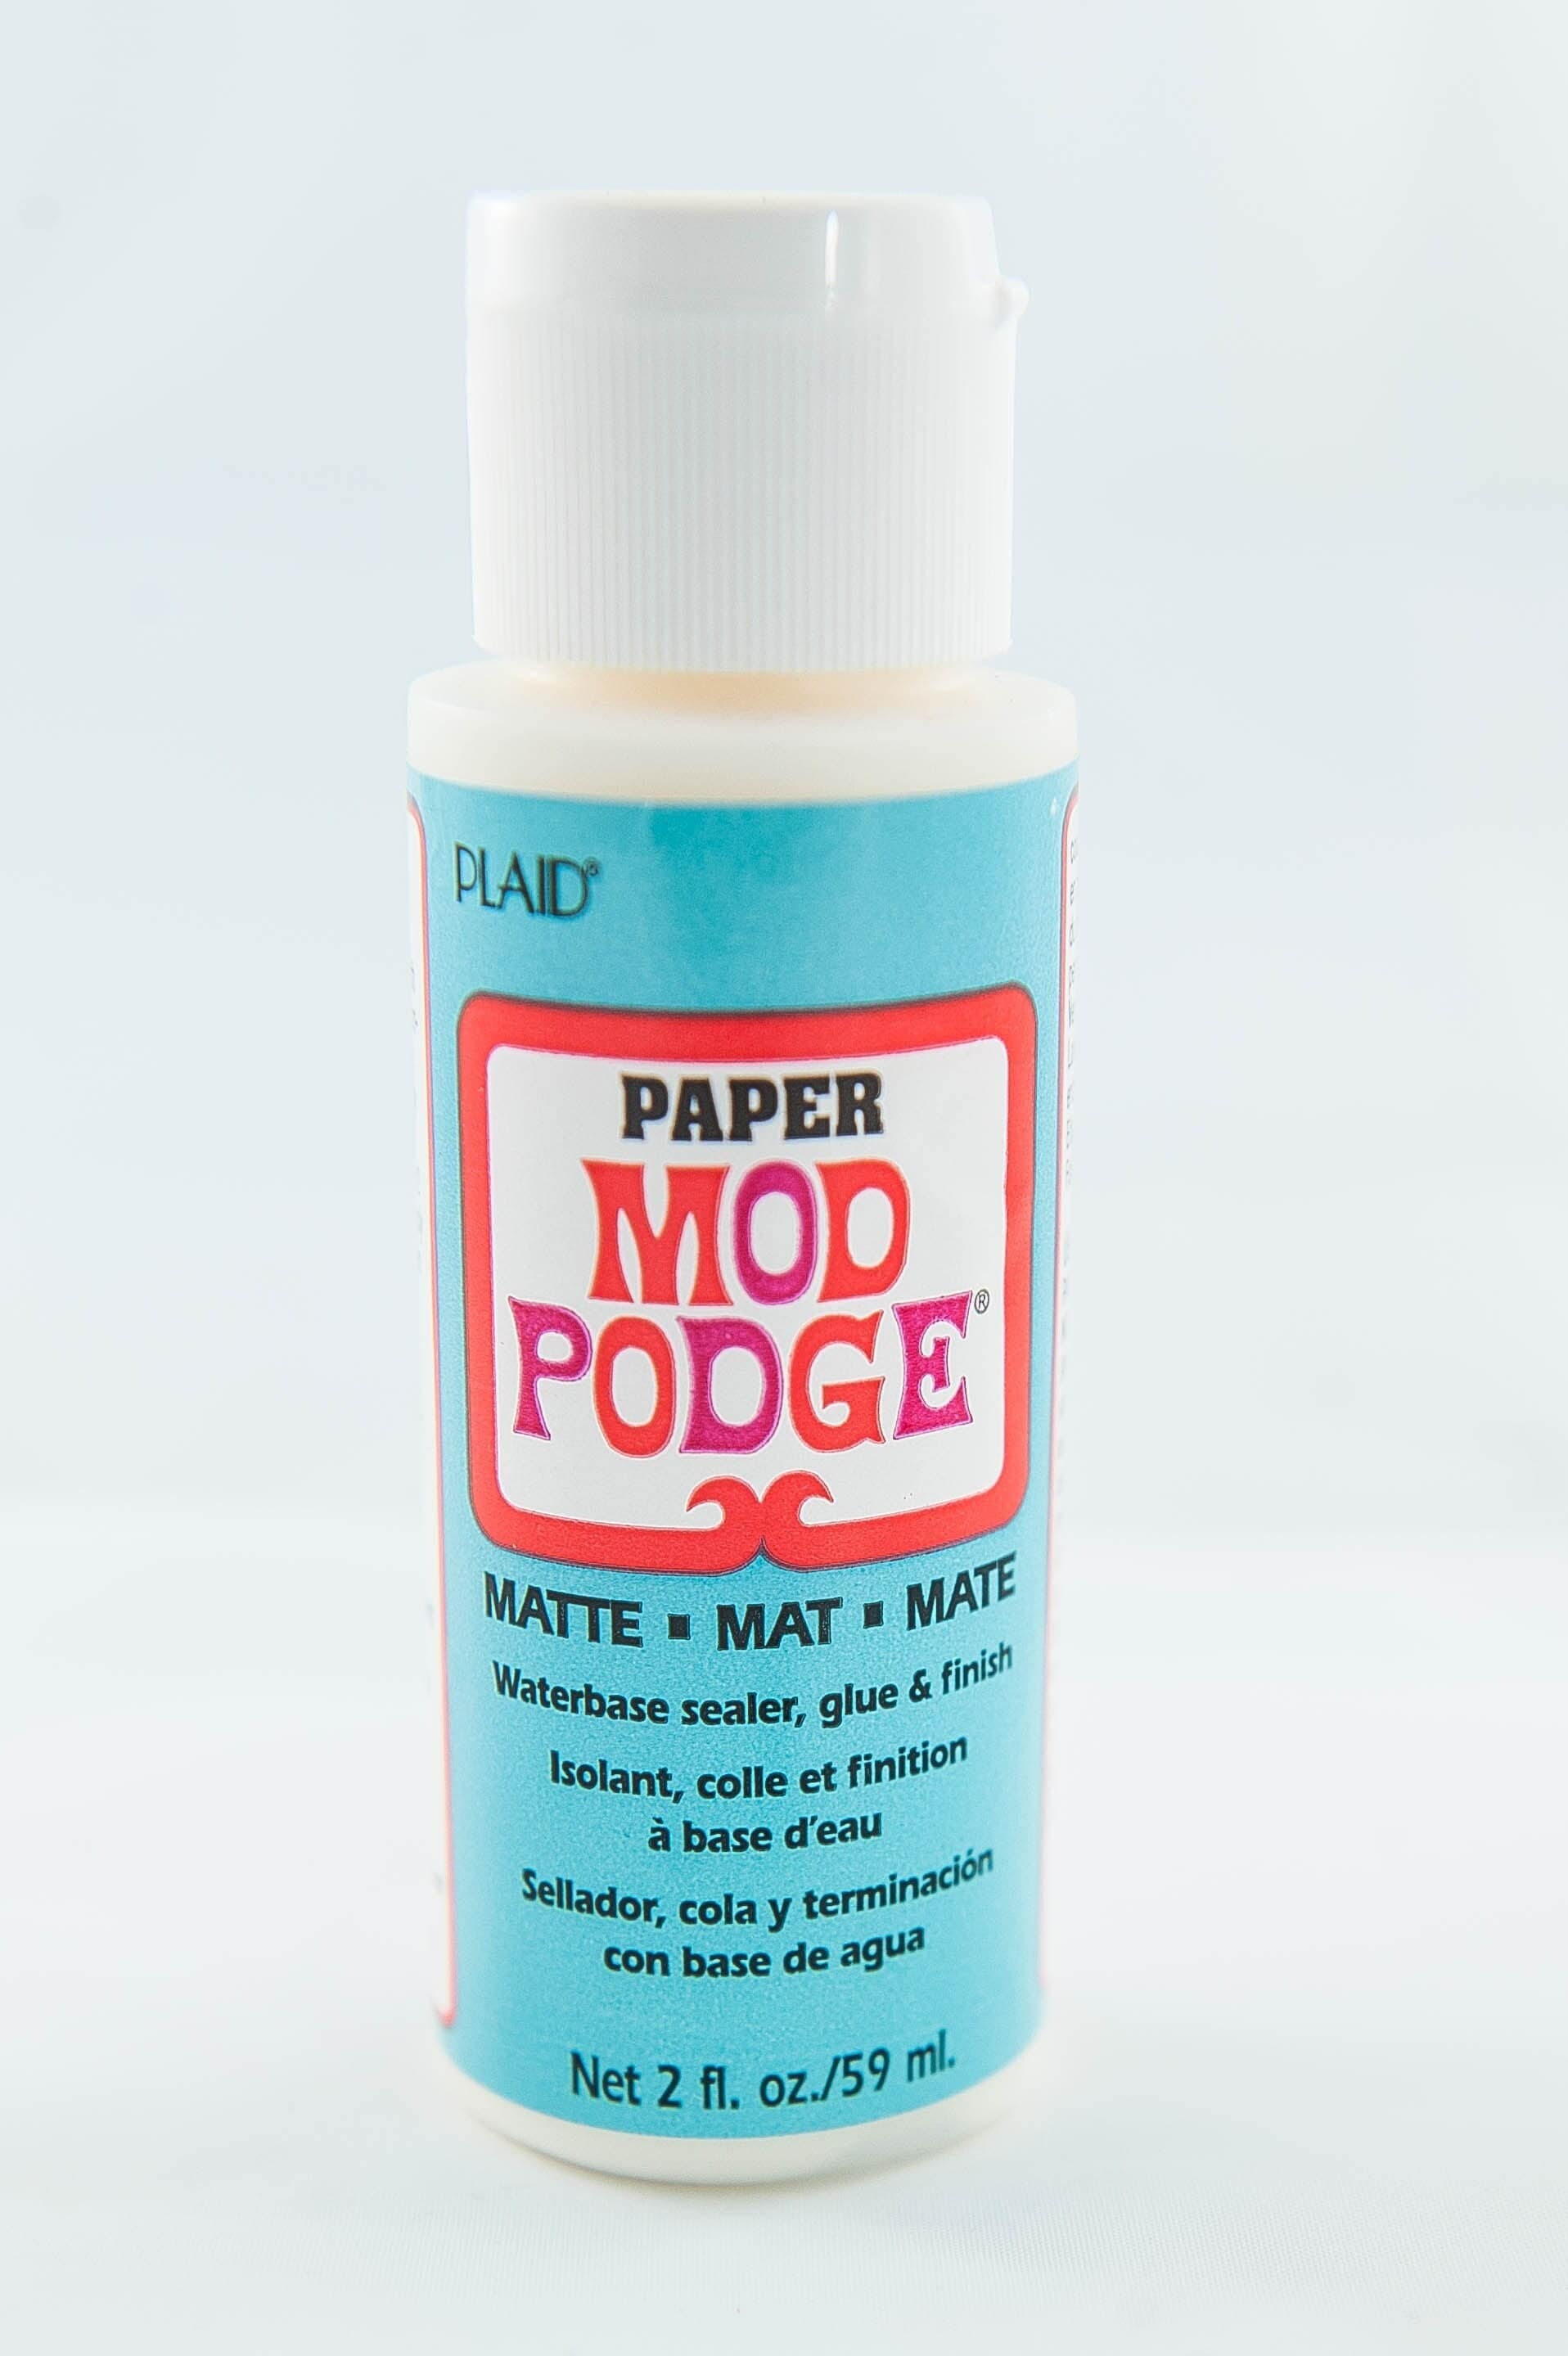  Mod Podge Spray Acrylic Sealer that is Specifically Formulated  to Seal Craft Projects, 12 ounce, Gloss & CS11201 Waterbase Sealer, Glue  and Finish, 8 oz, Gloss